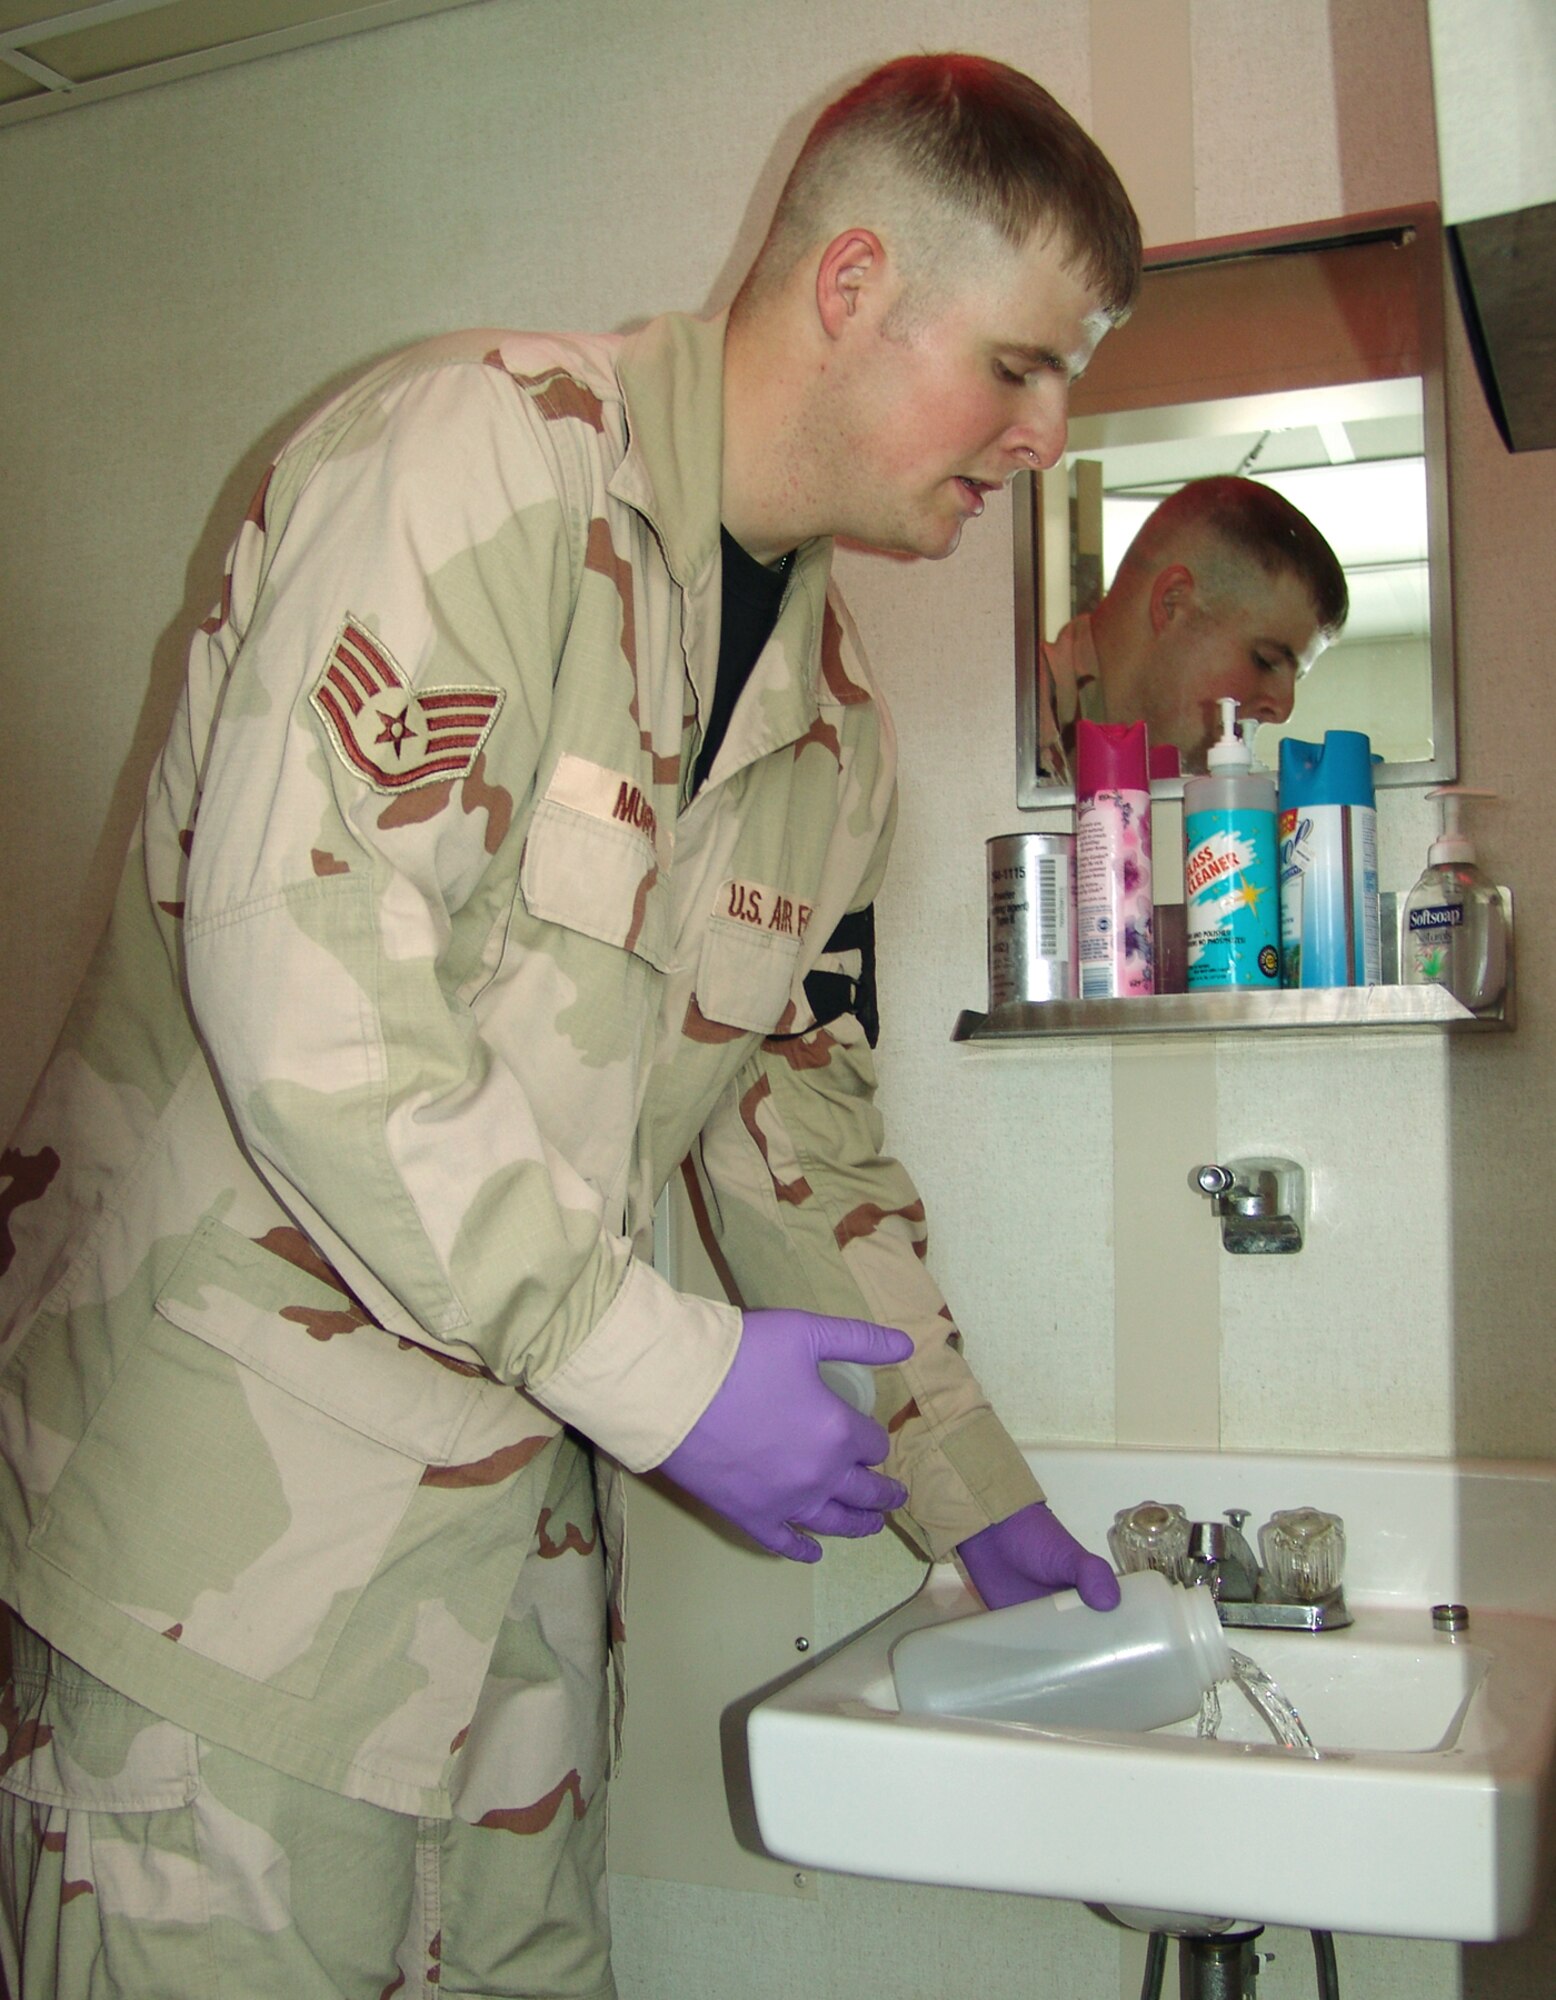 SOUTHWEST ASIA -- Staff Sgt. Justin Murphy pours out a water sample at a latrine aboard an Army ship.  The Airmen who make up the 2nd Preventive Medicine Team Air Force are responsible for the healthy living environment of 60,000 Soldiers at eight different camps.  (U.S. Air Force photo by Staff Sgt. Martin Jackson)